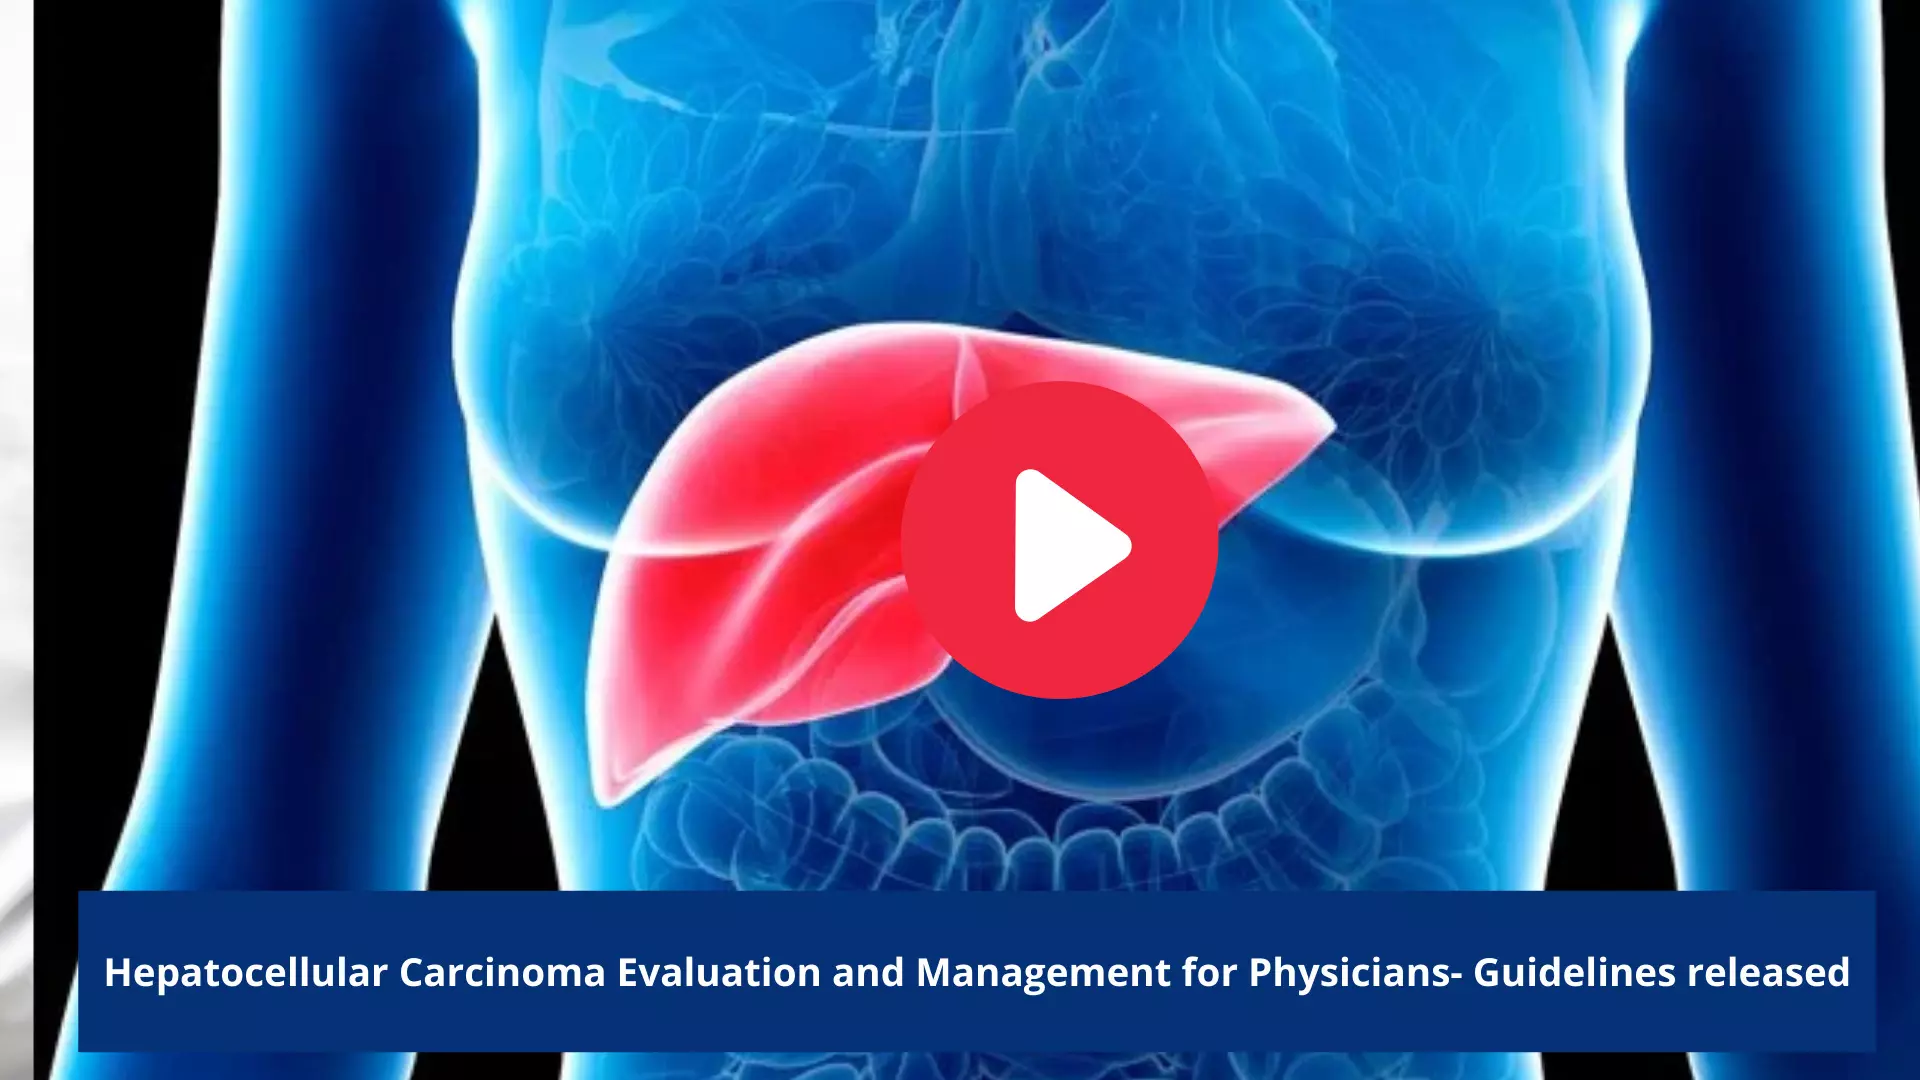 Hepatocellular Carcinoma Evaluation and Management for Physicians- Guidelines released